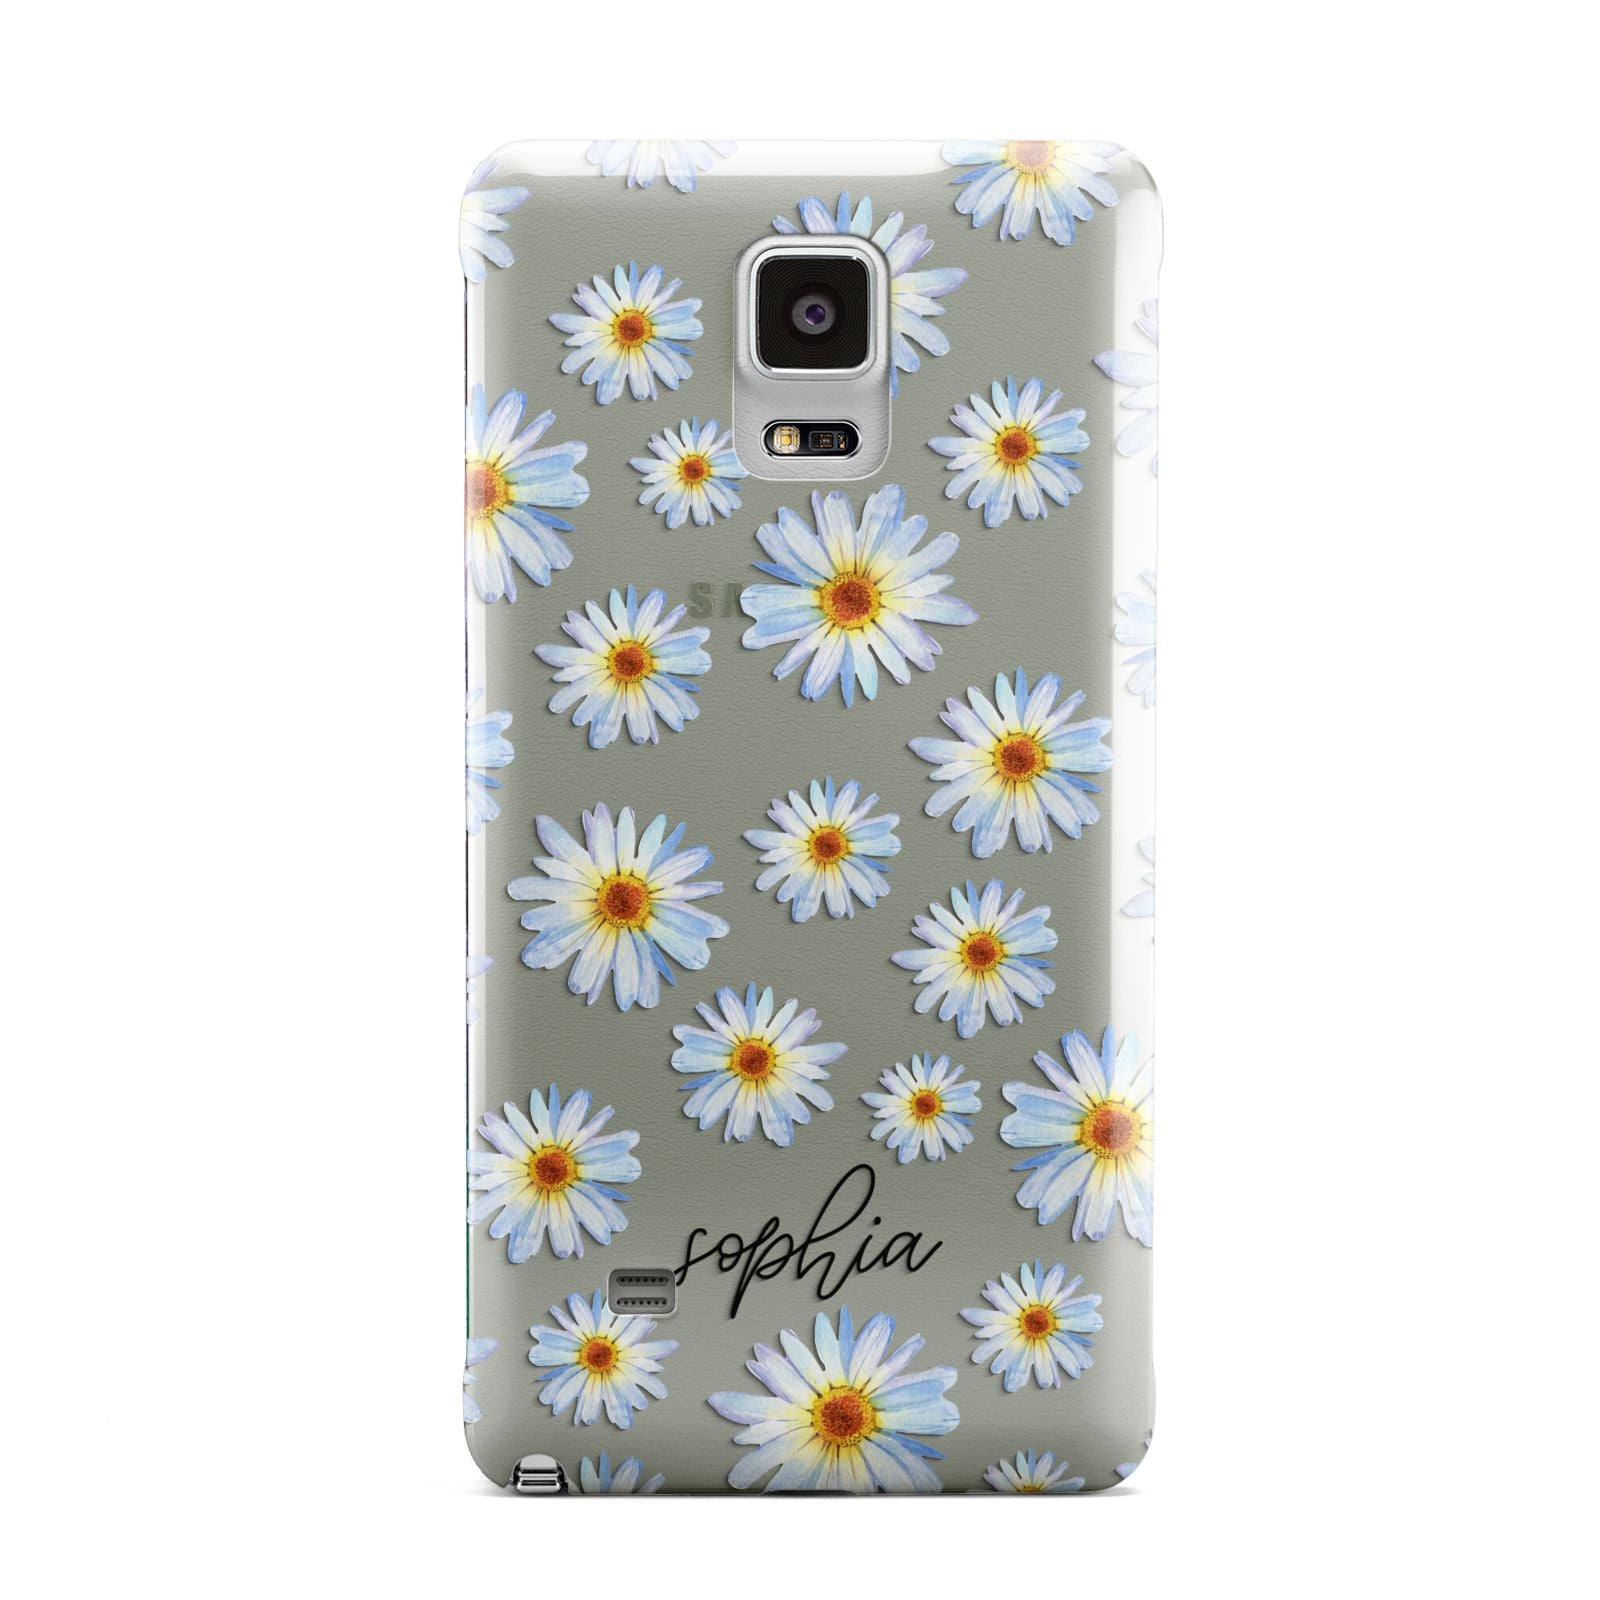 Personalised Daisy Samsung Galaxy Note 4 Case